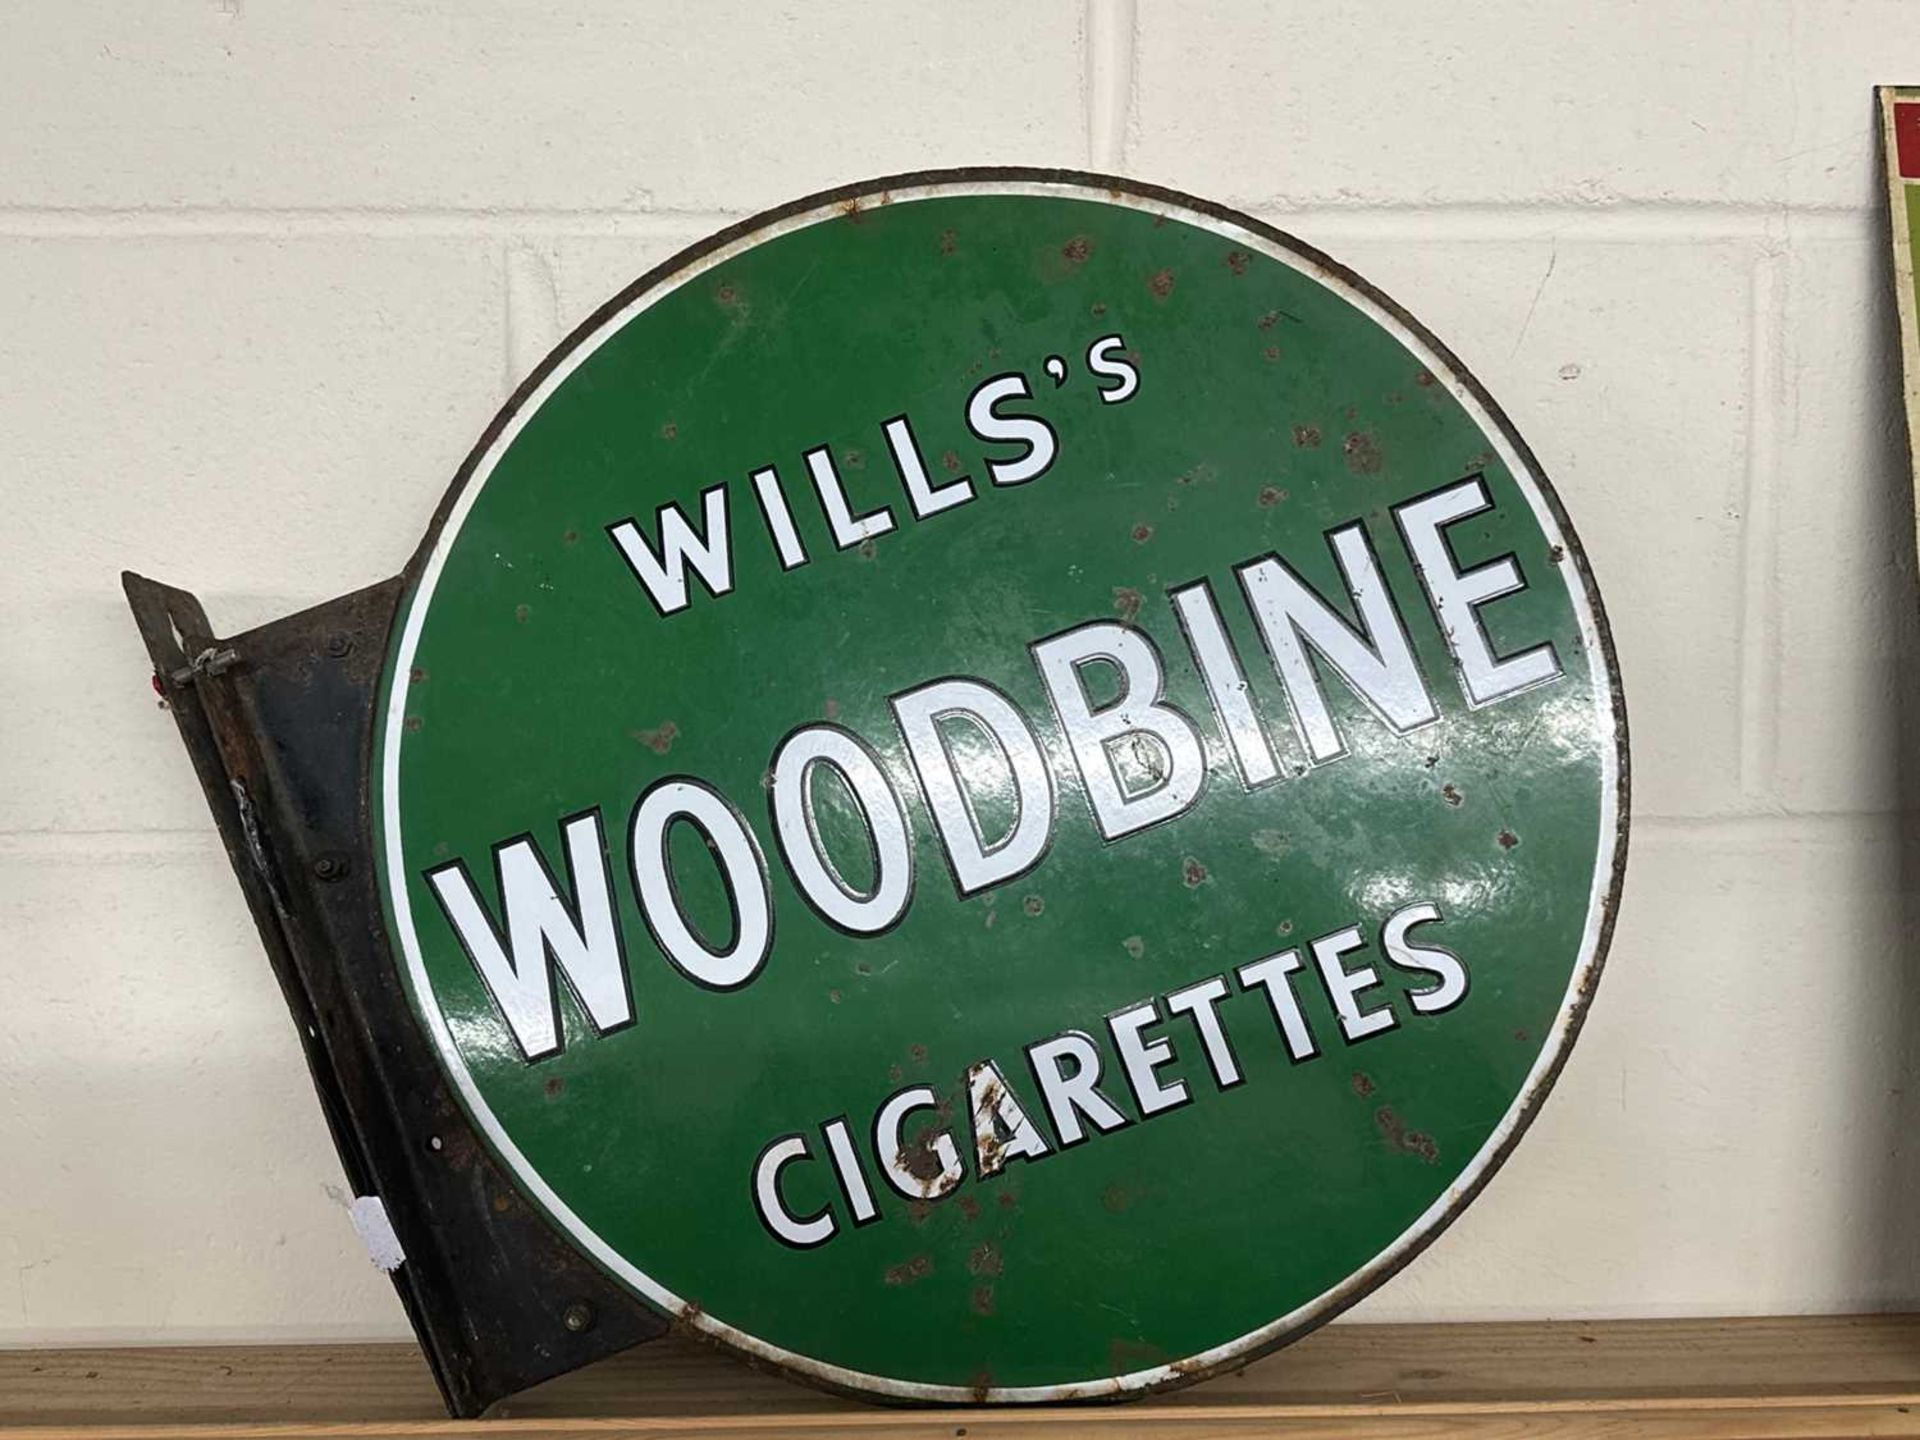 A double sided circular flag-type enamelled sign "Wills's Woodbine Cigarettes"